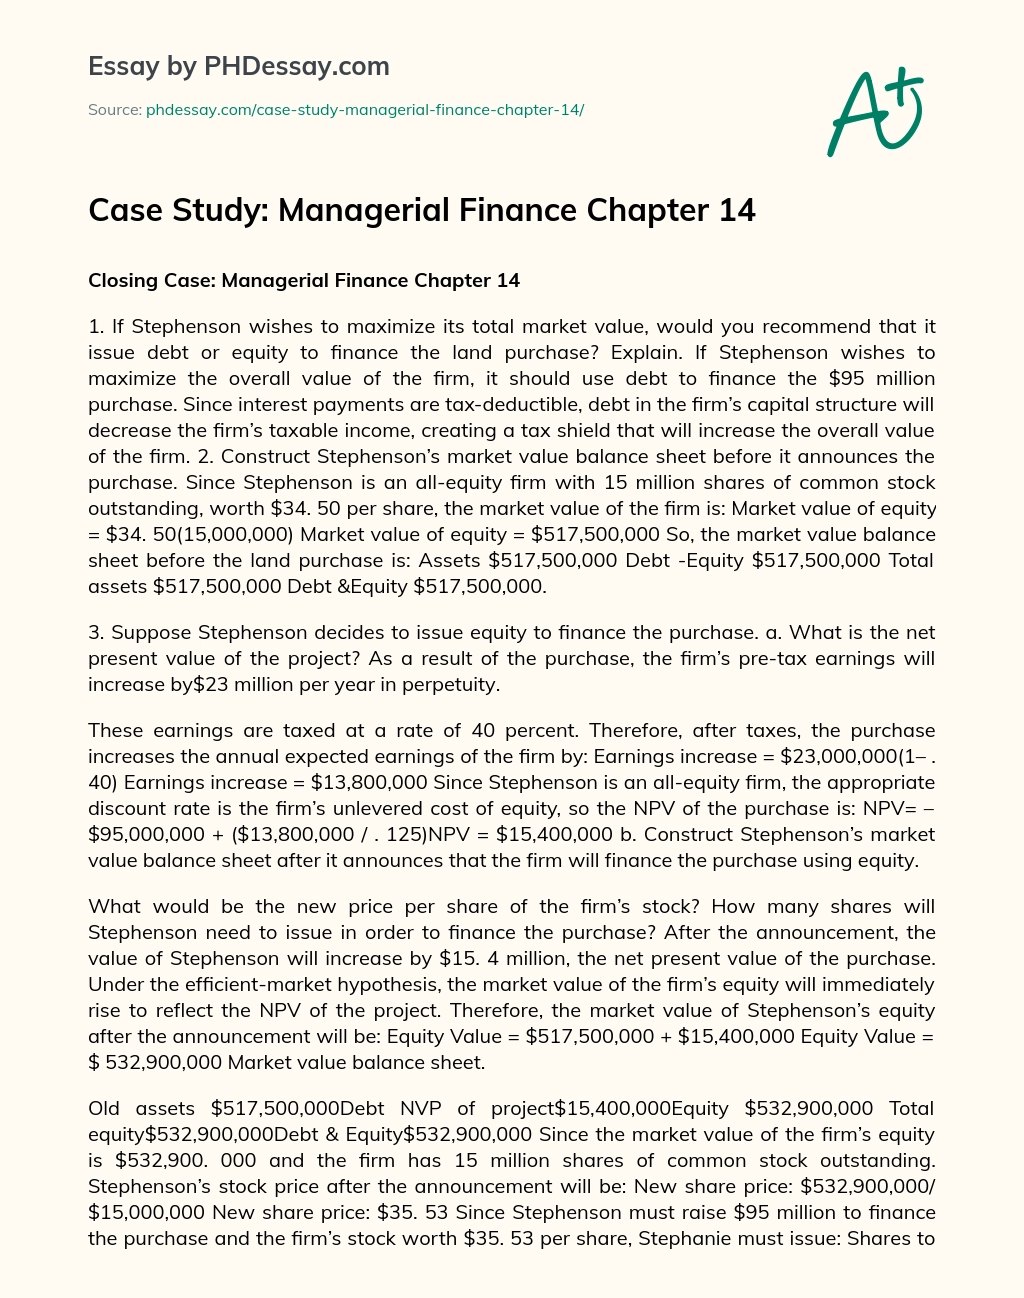 Case Study: Managerial Finance Chapter 14 essay